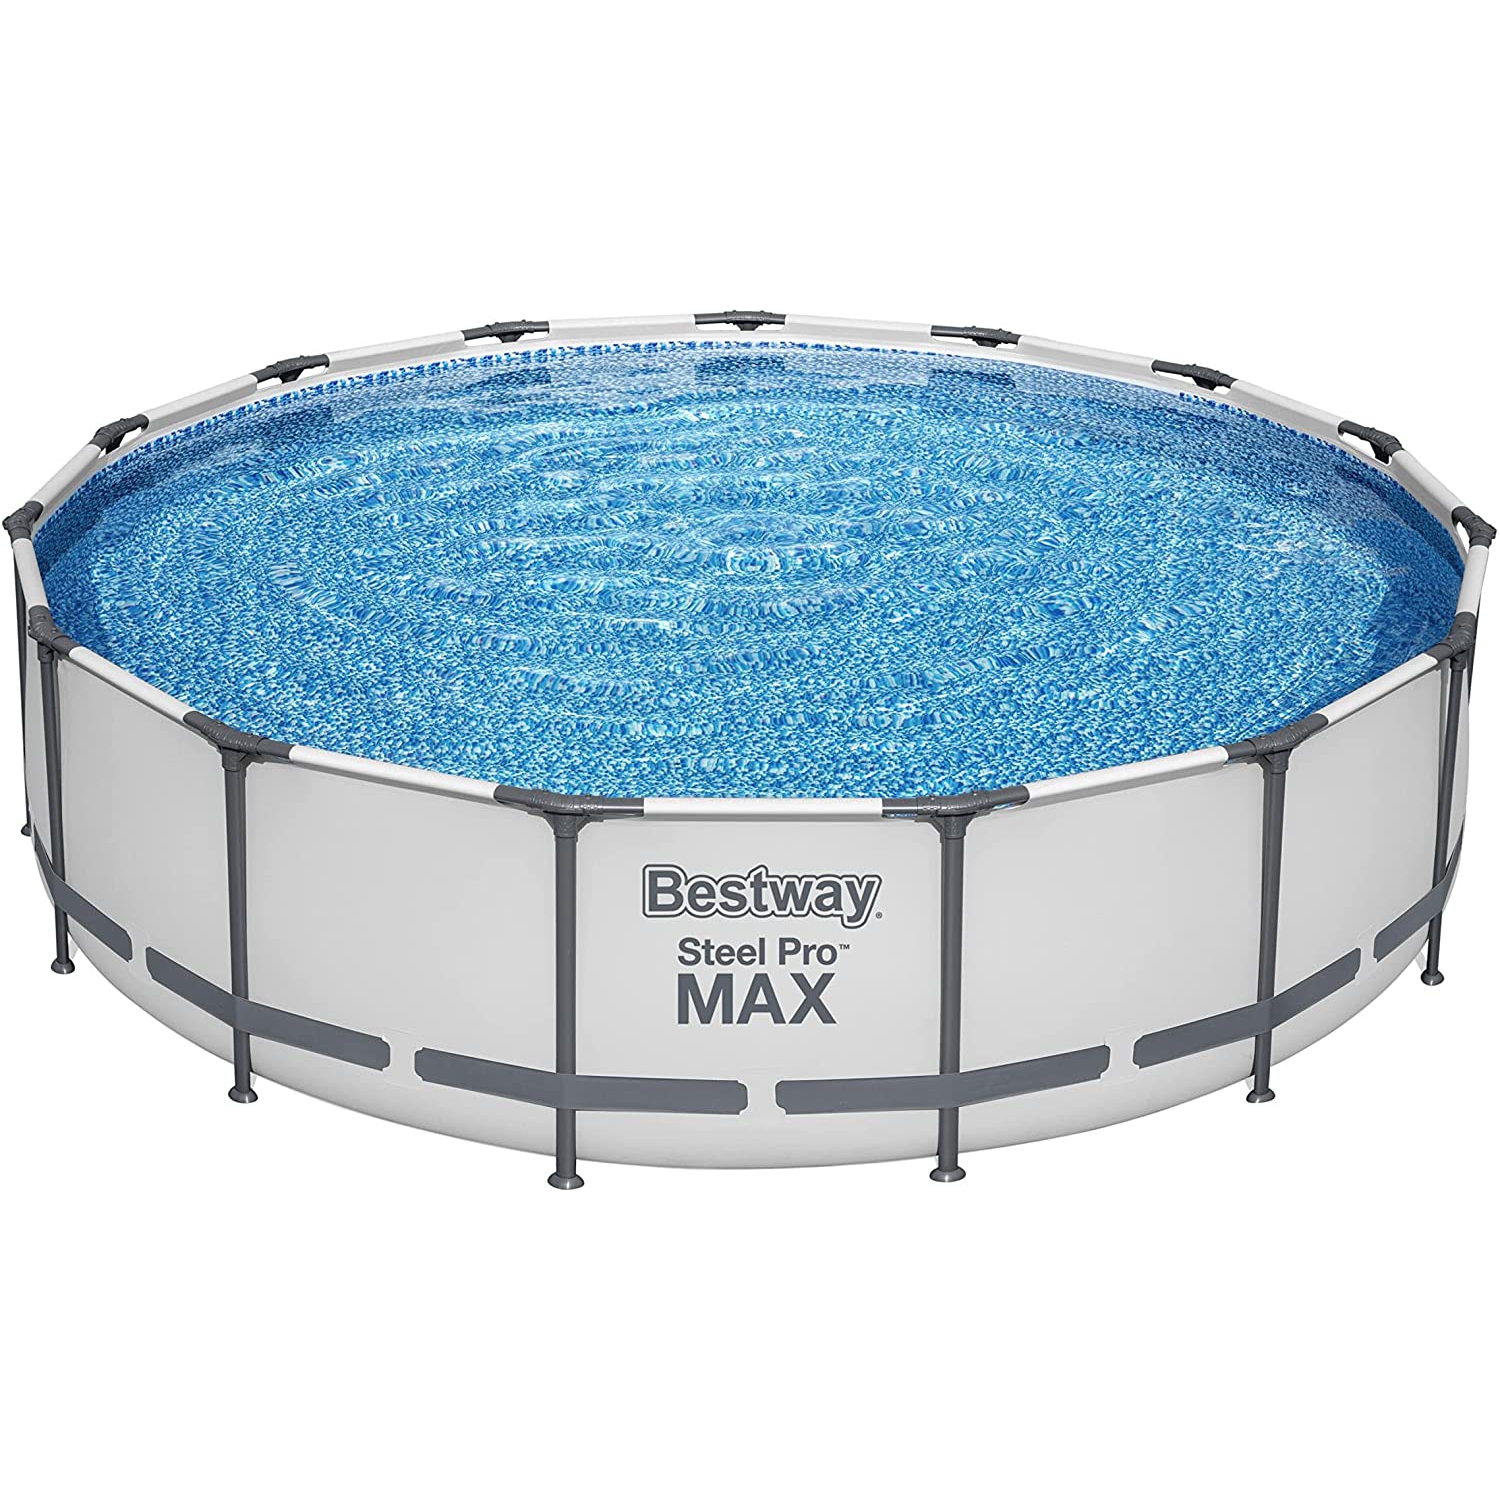 Bestway 56687E Steel Pro Max 15'x42 Above Ground Pool